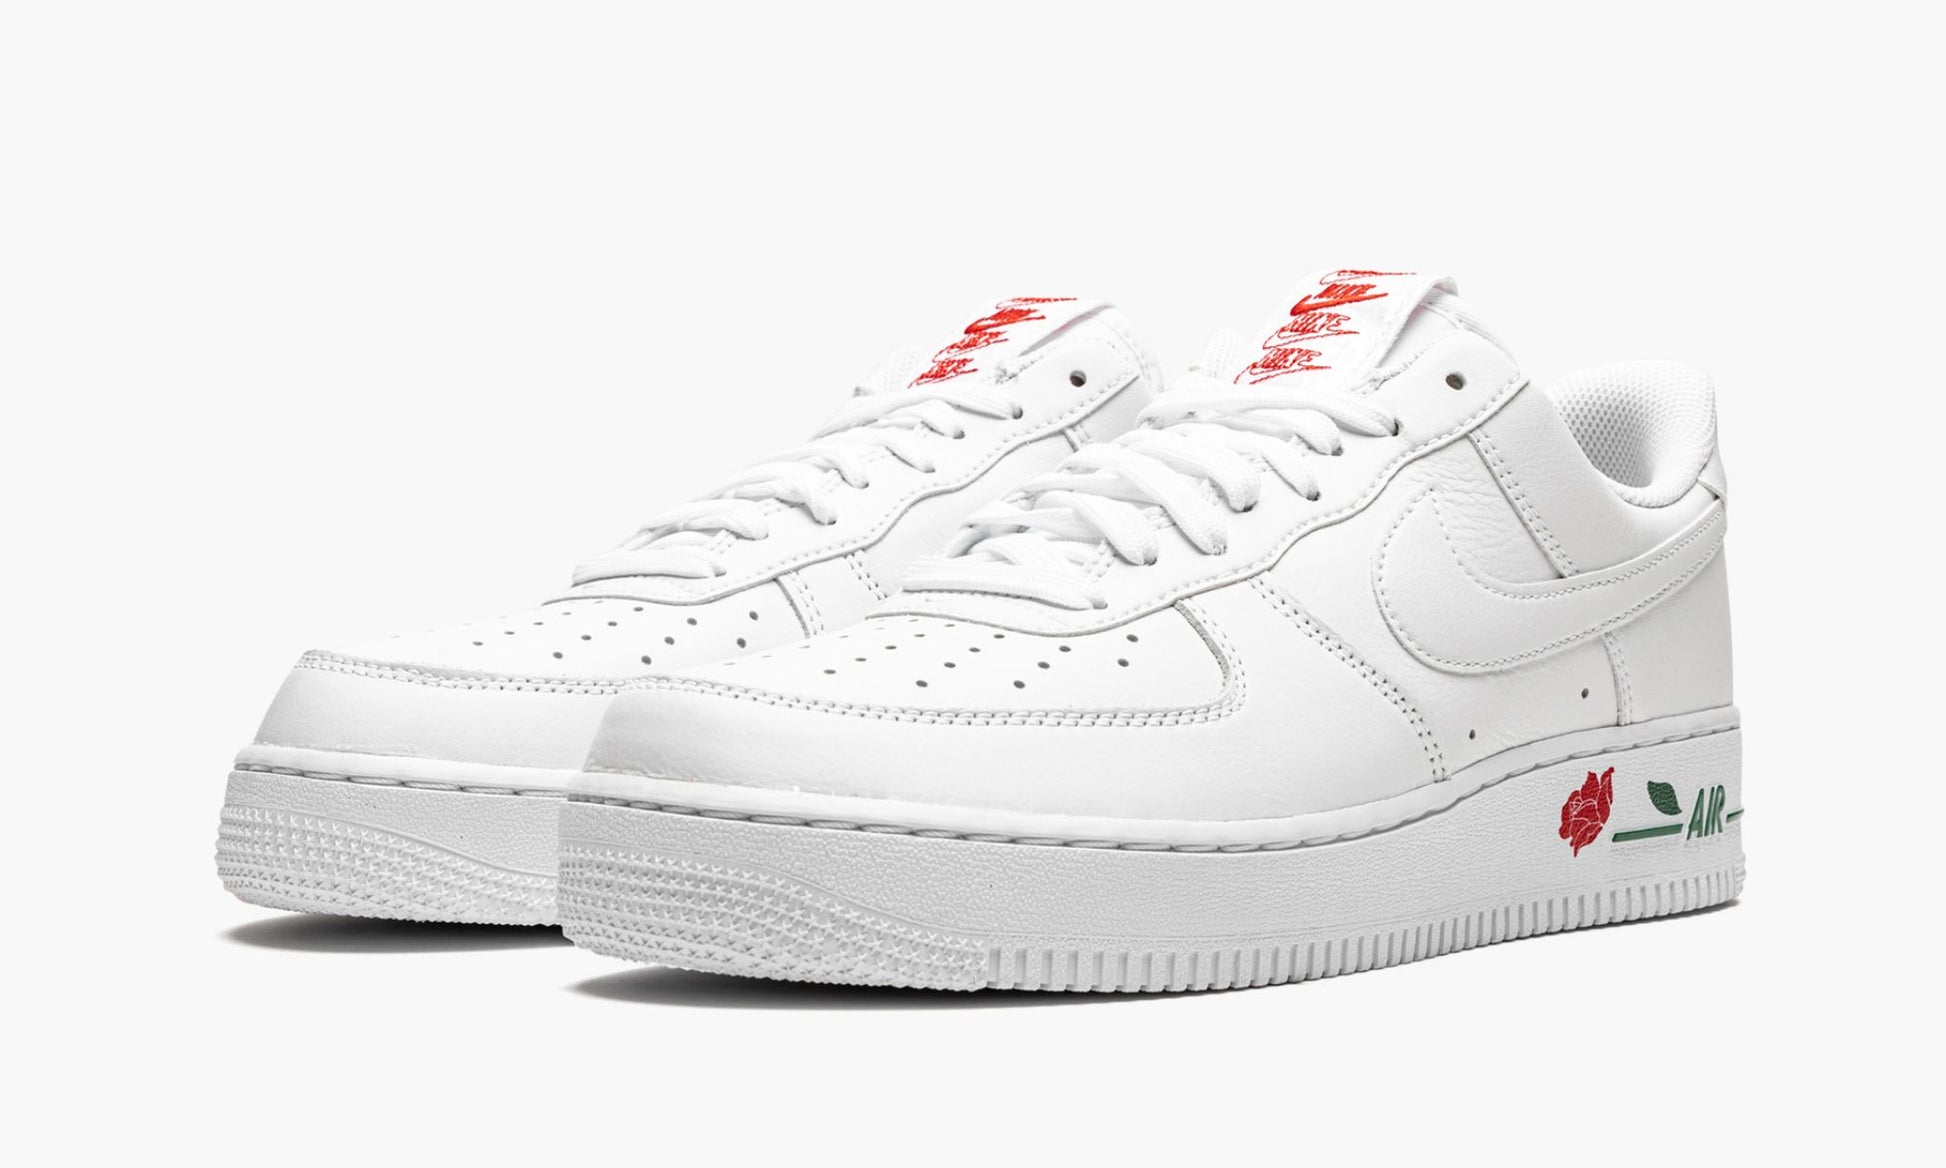 Air Force 1 Low '07 LX "Thank You Plastic Bag"